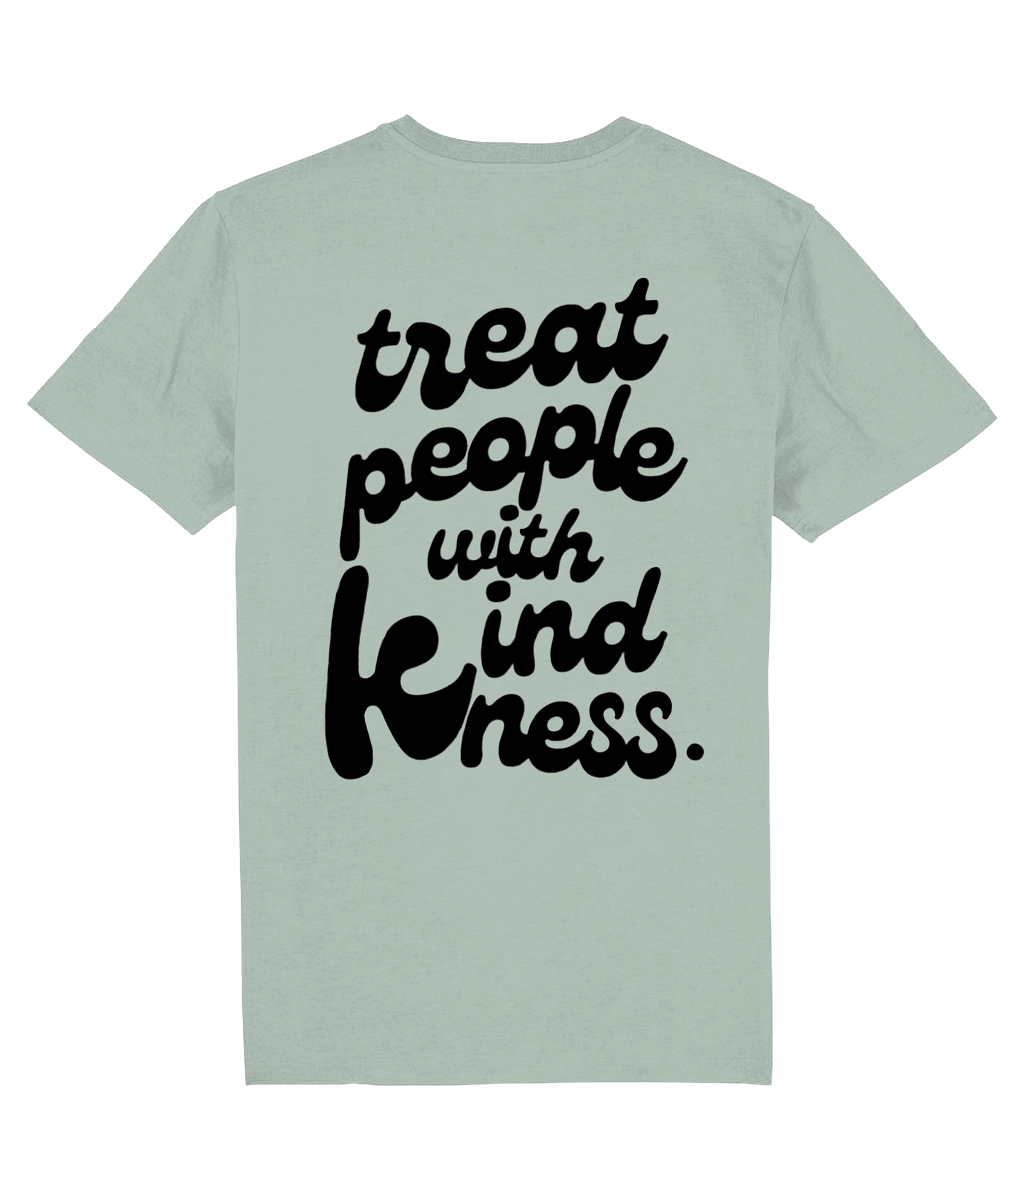 TREAT PEOPLE WITH KINDNESS SHIRT